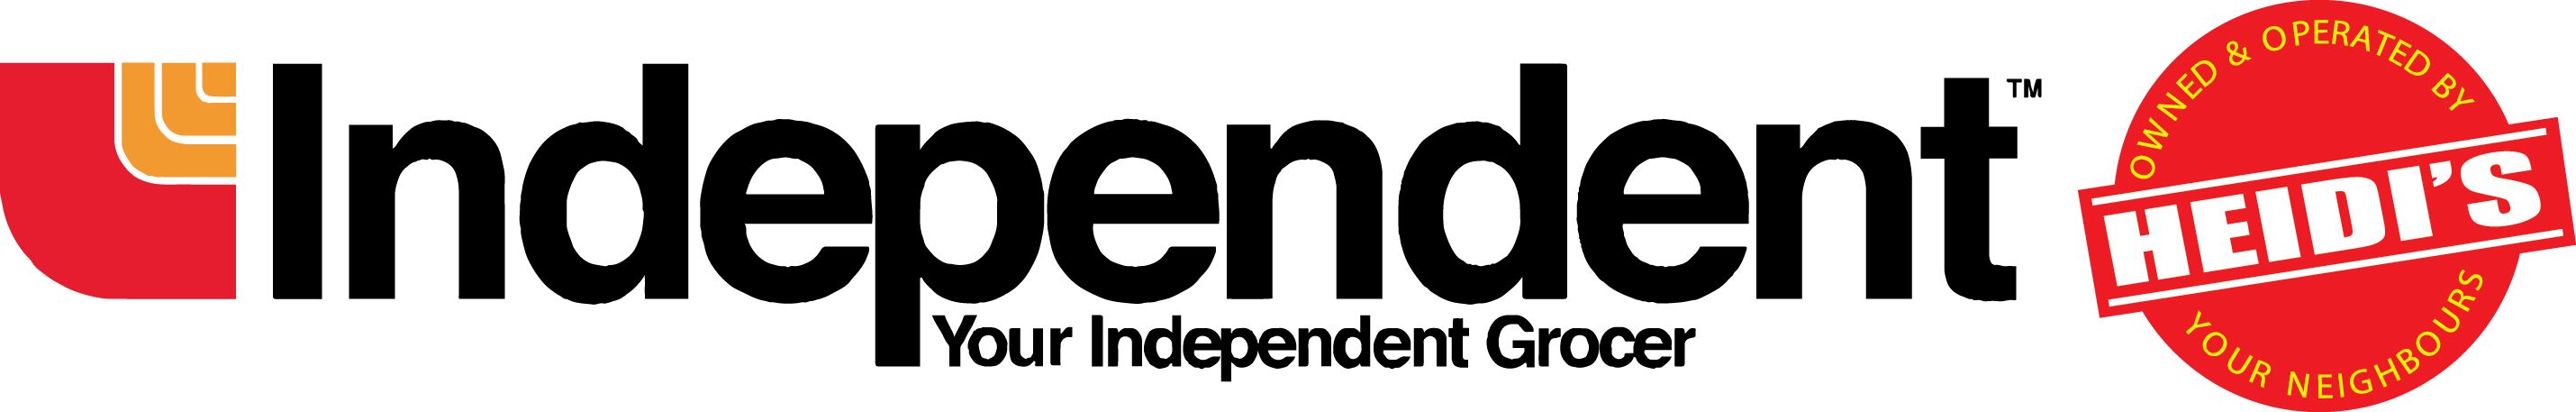 Heidi’s Your Independent Grocer Logo